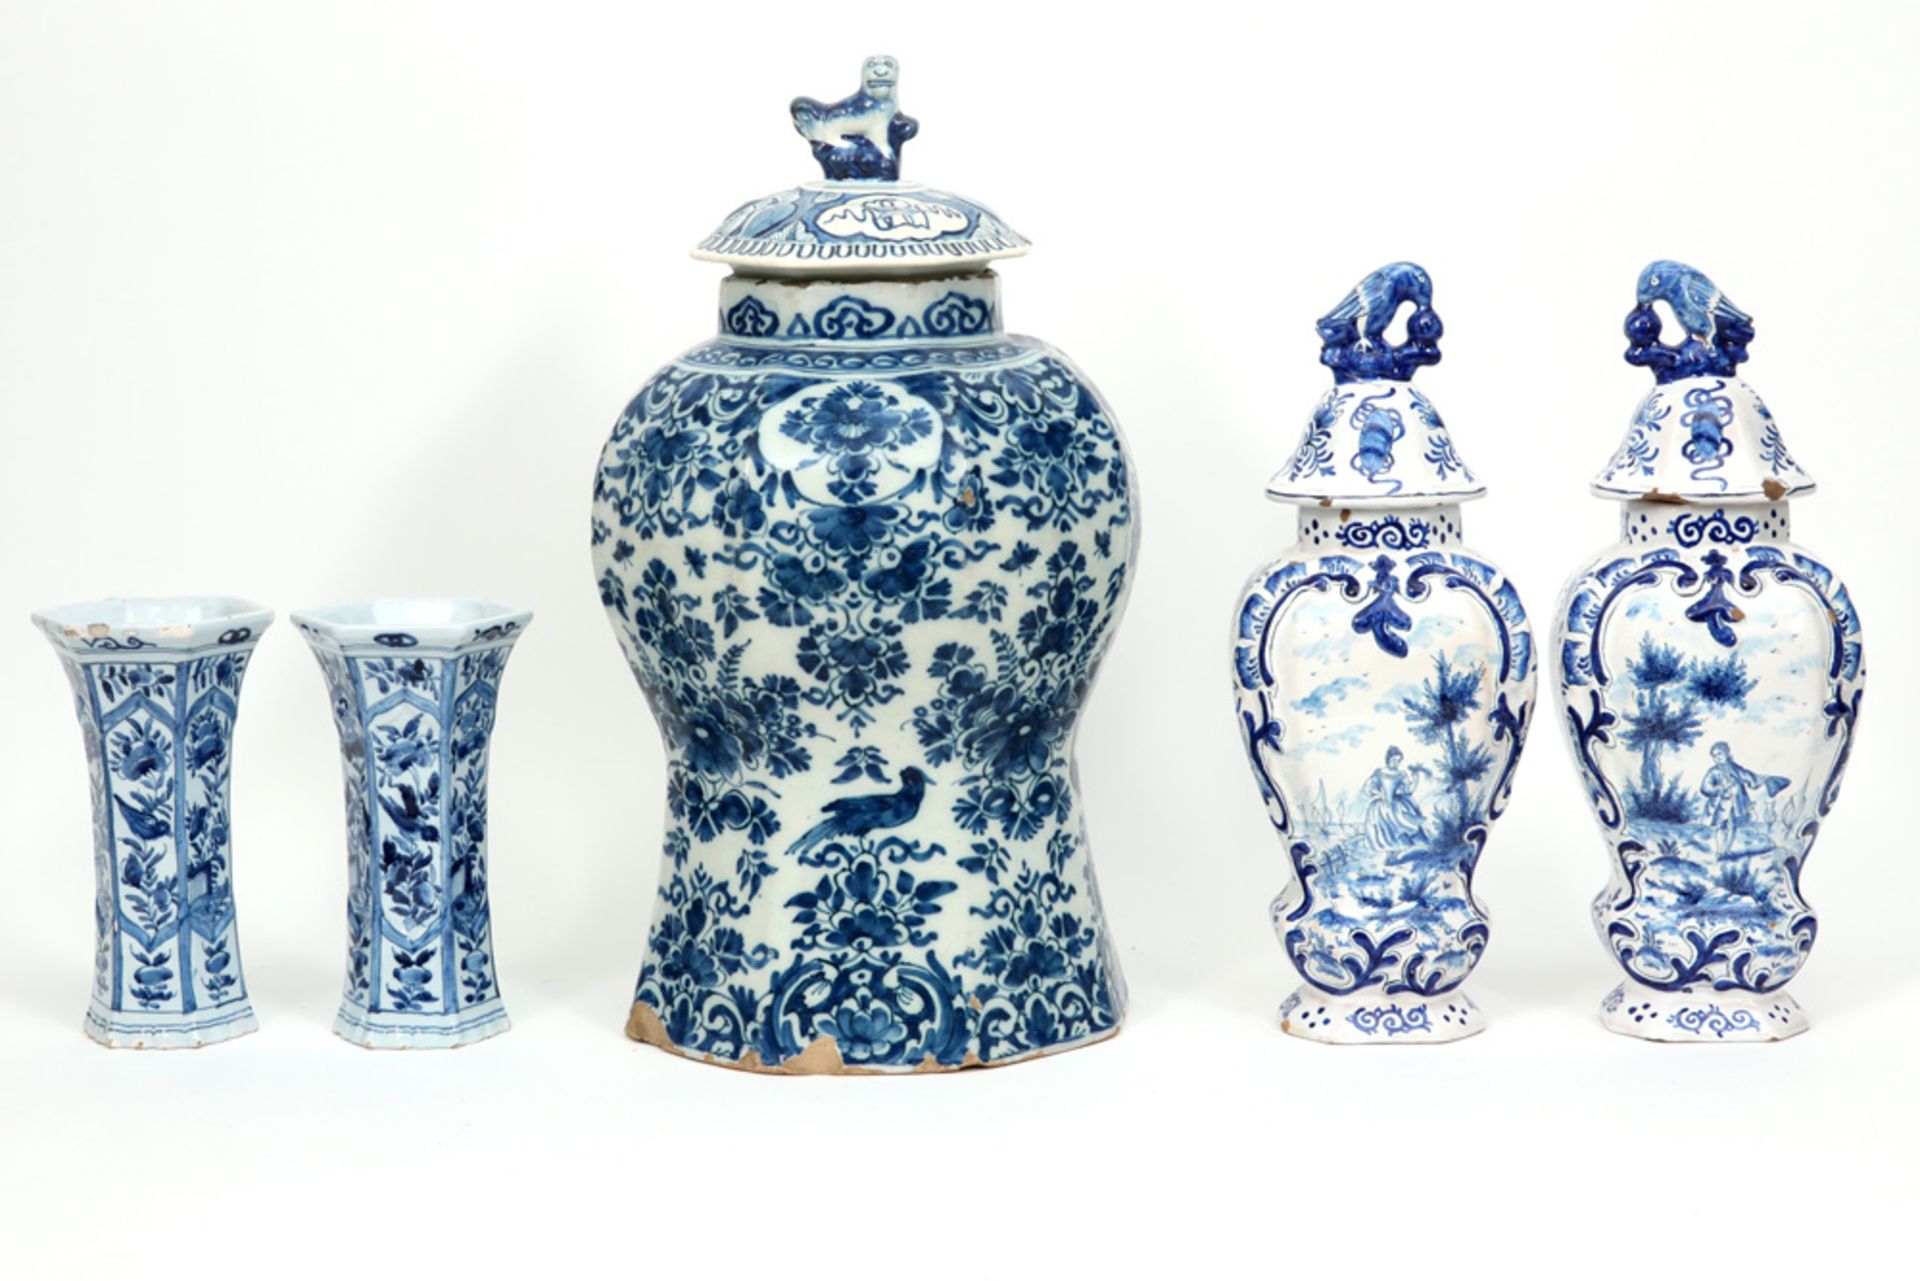 5 antique pieces of ceramic from Delft with a blue-white decor